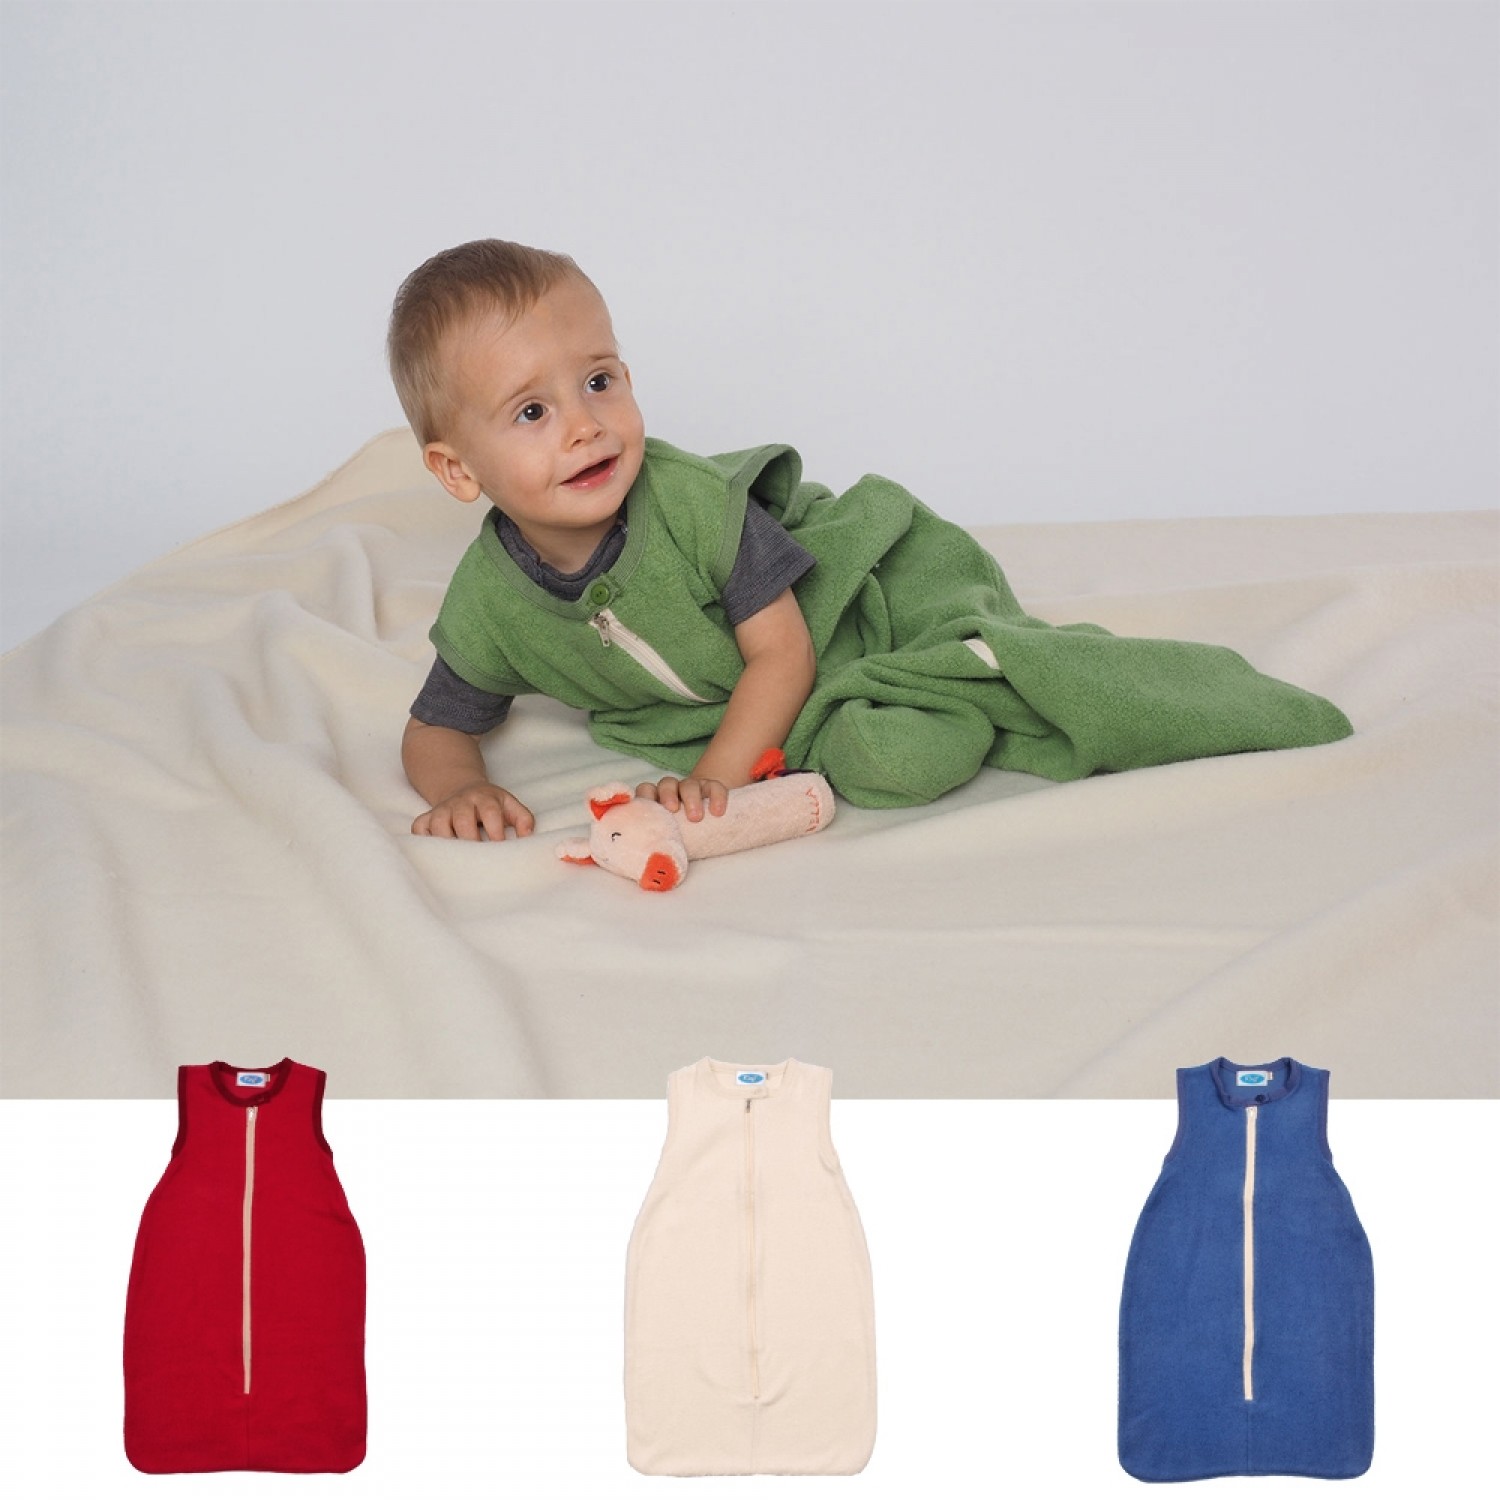 Baby sleeping bag without sleeves - organic cotton | Reiff